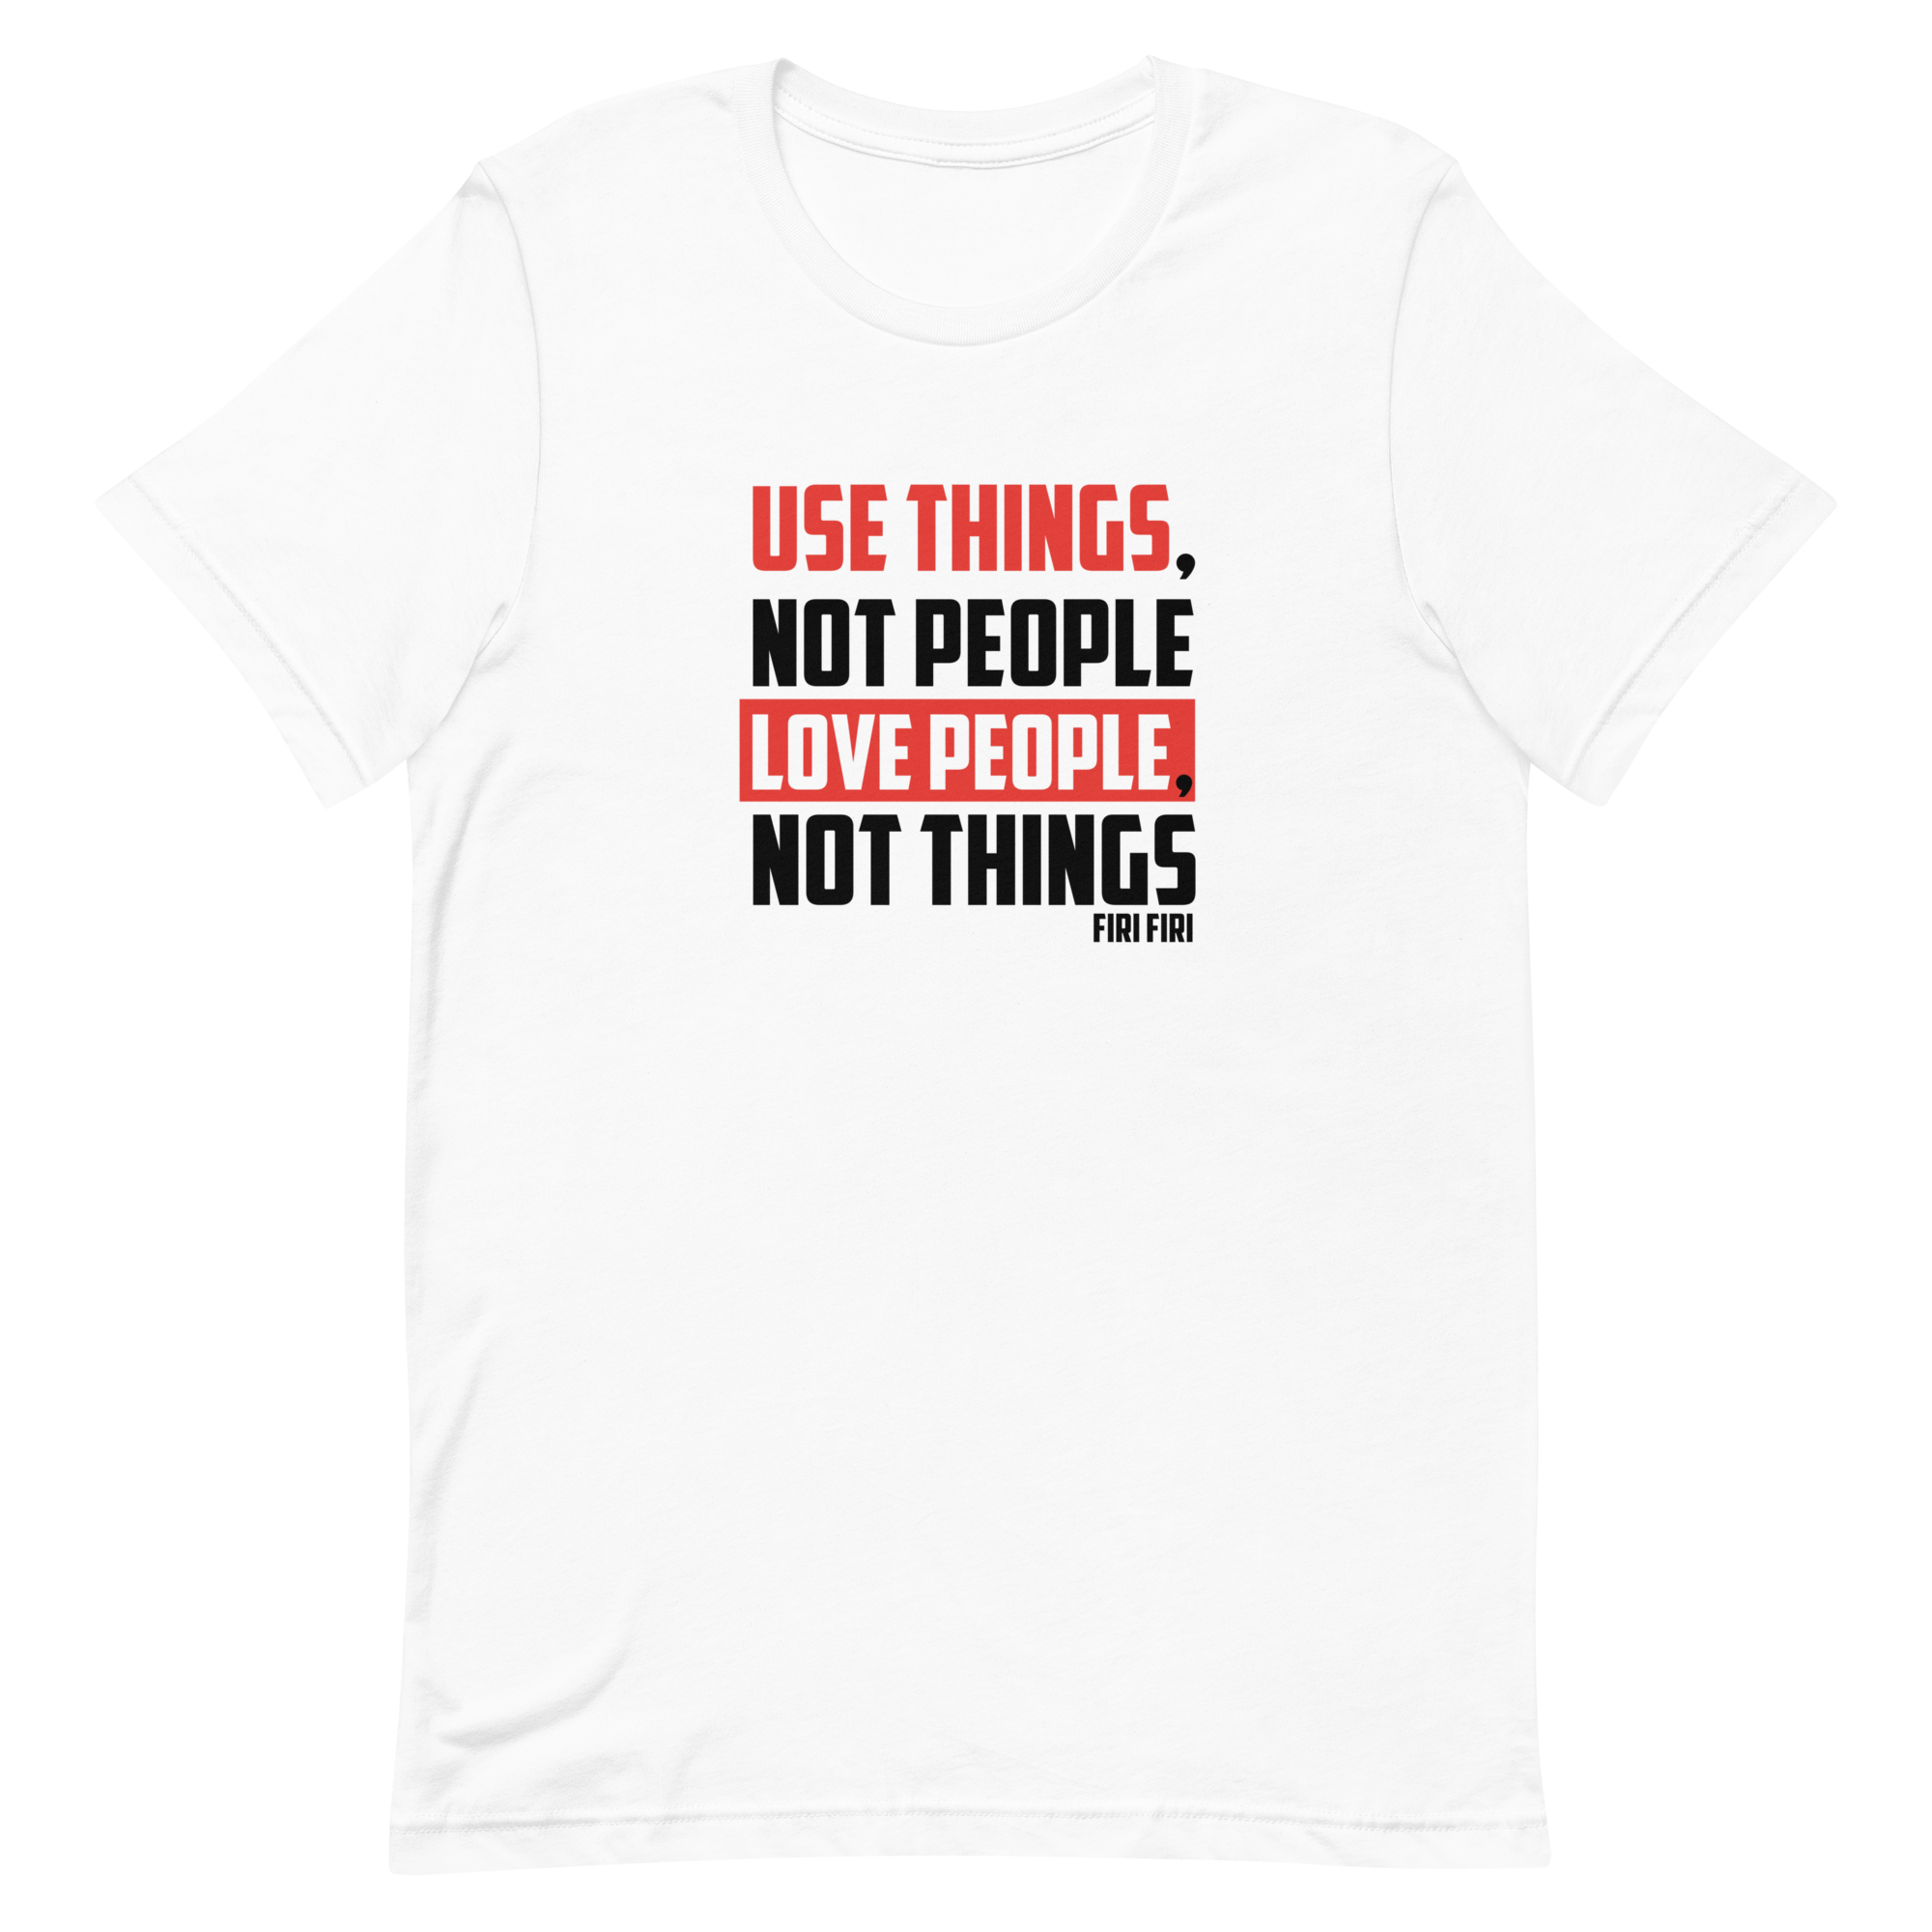 "Use things, not people" T-shirt